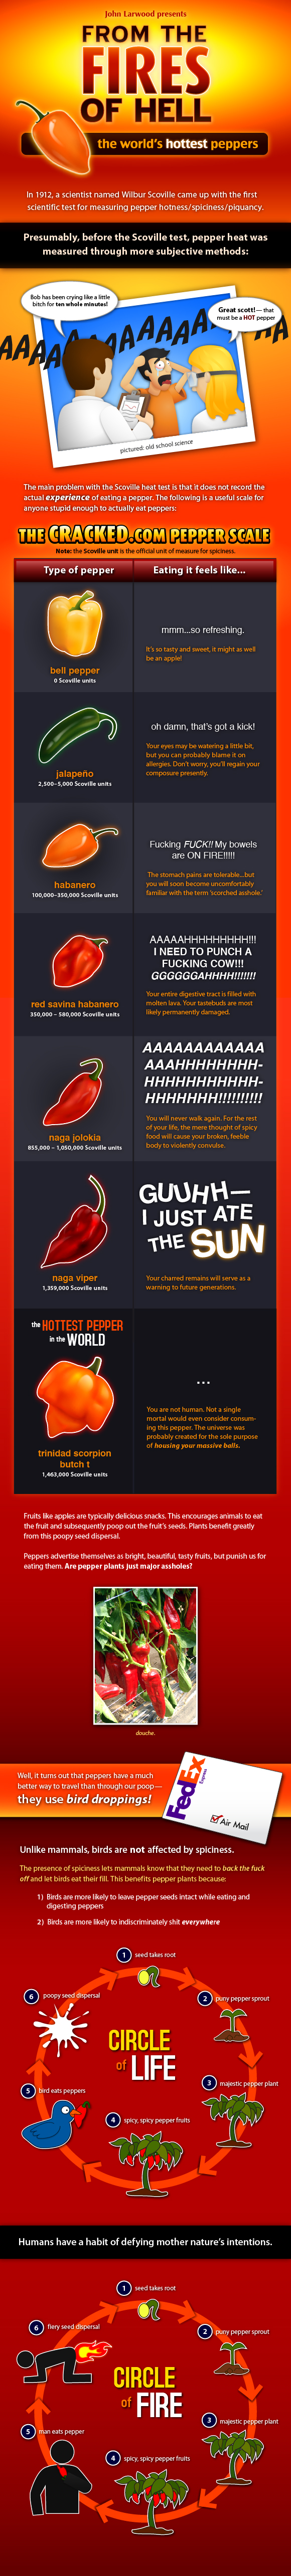 From the Fires of Hell: The World's Hottest Peppers infographic